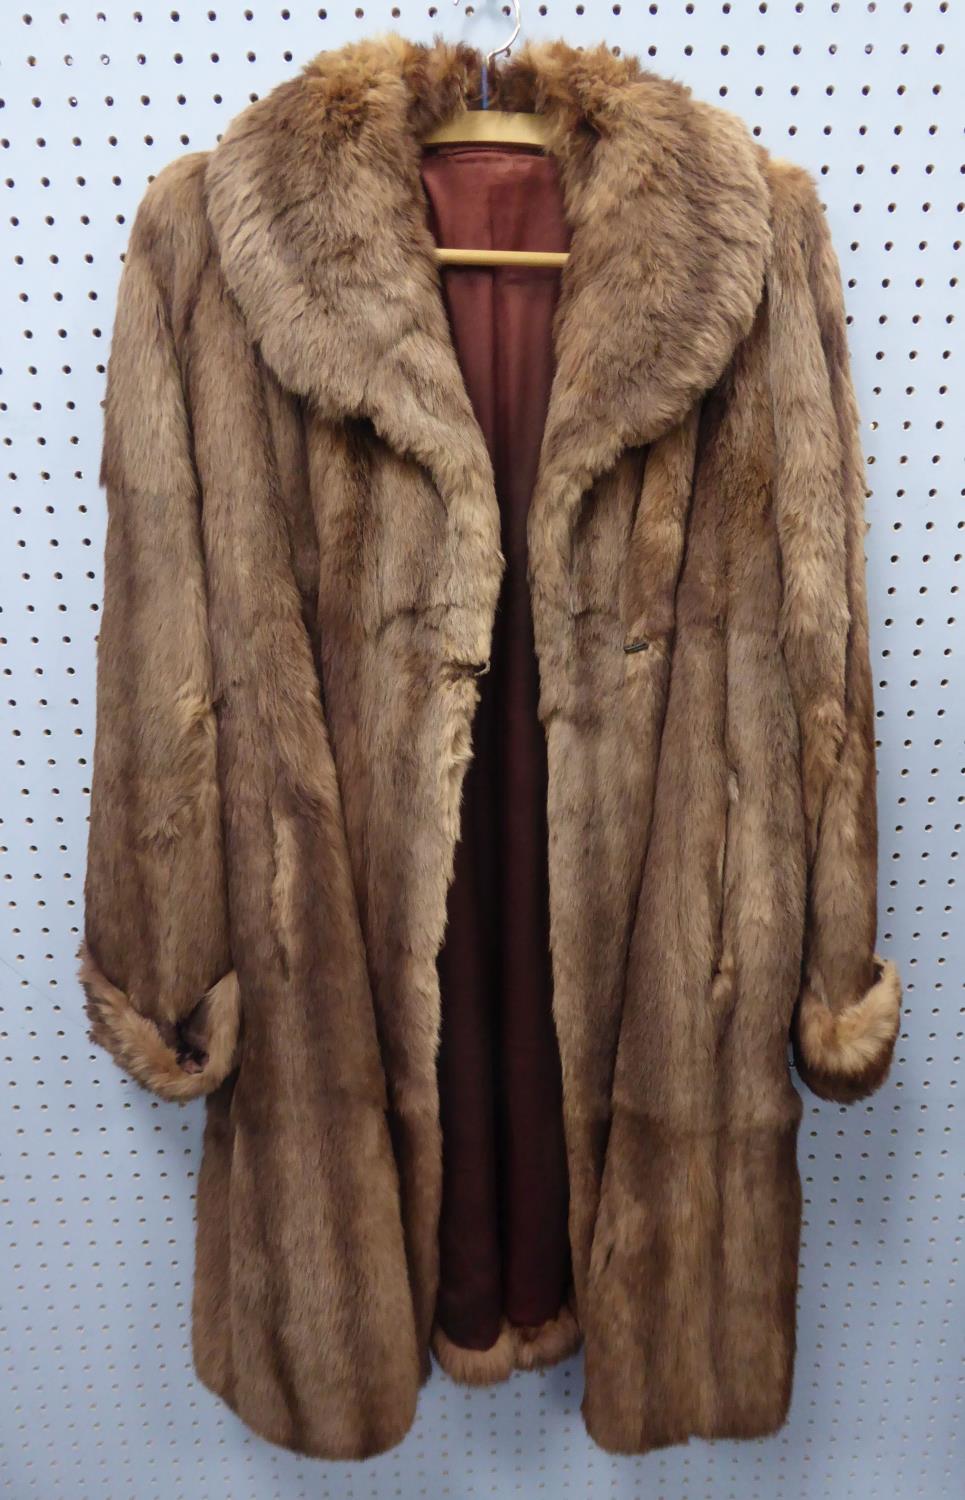 A LIGHT BROWN RABBIT LADIES COAT having out turned collar and cuffs, front seem pockets and a DARK